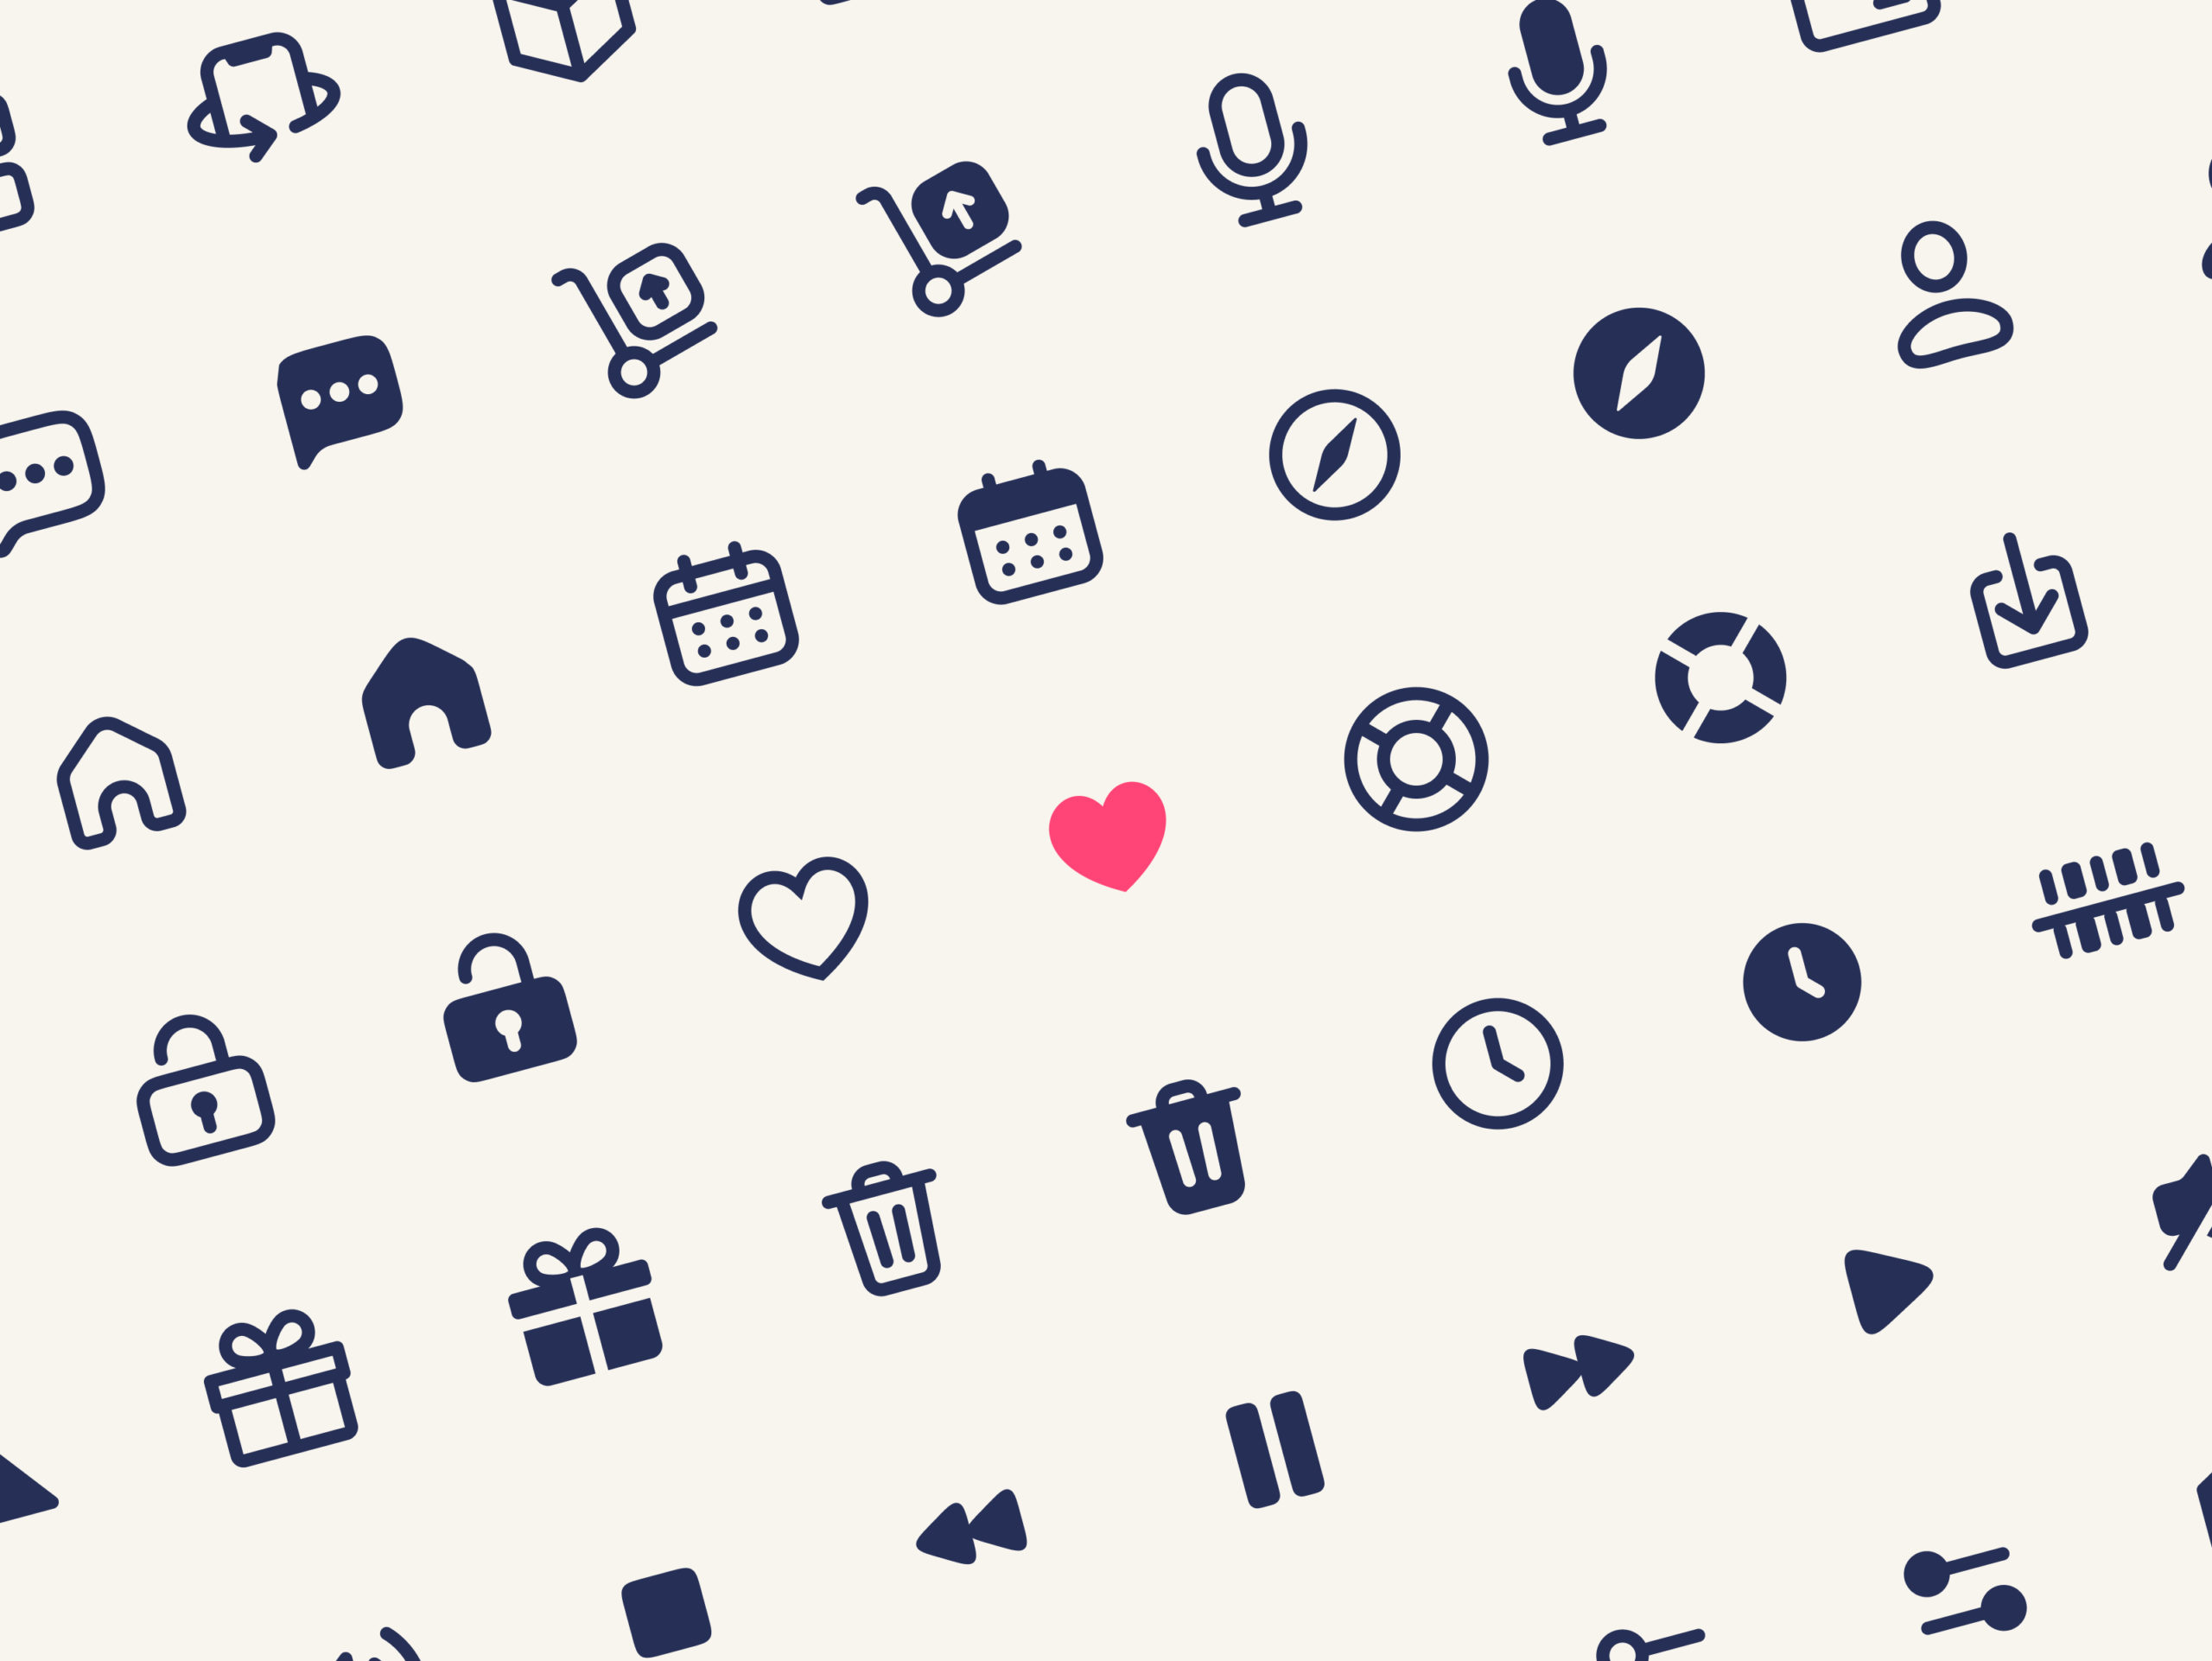 Free icons for website - greliving